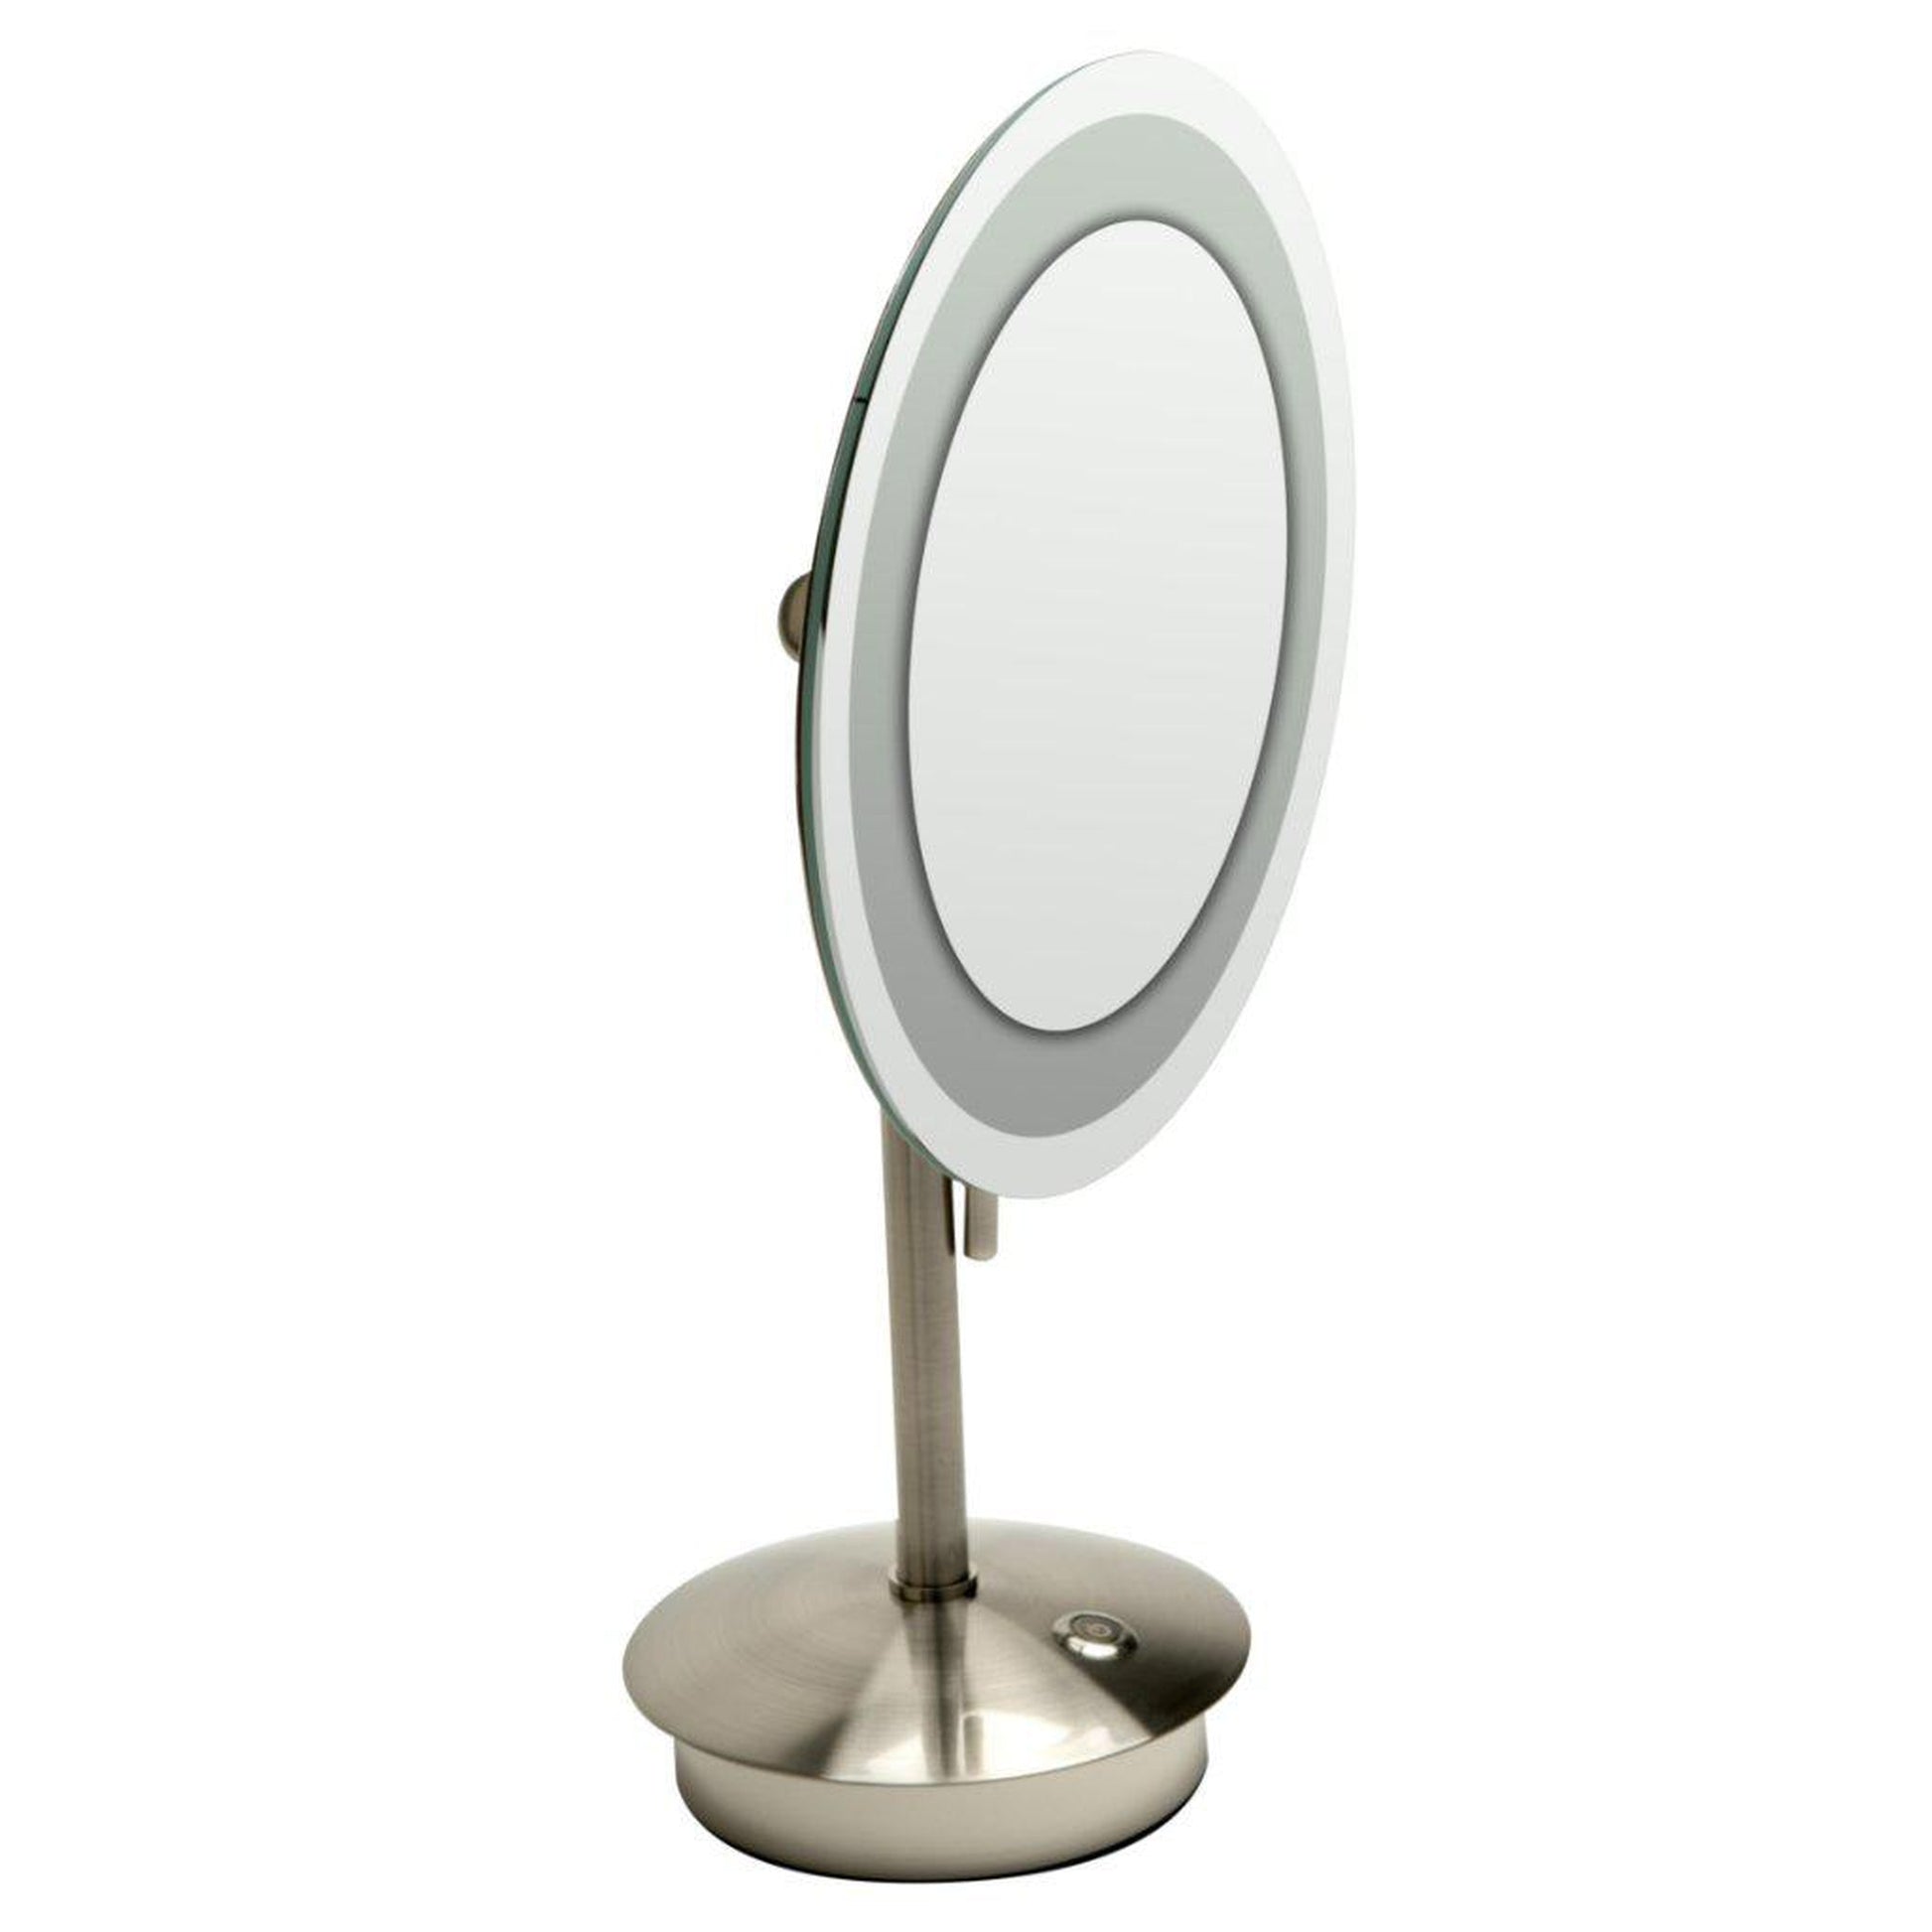 ALFI Brand ABM9 FLED-BN 9" Brushed Nickel Freestanding Tabletop Round 5x Magnifying Cosmetic Mirror With Light